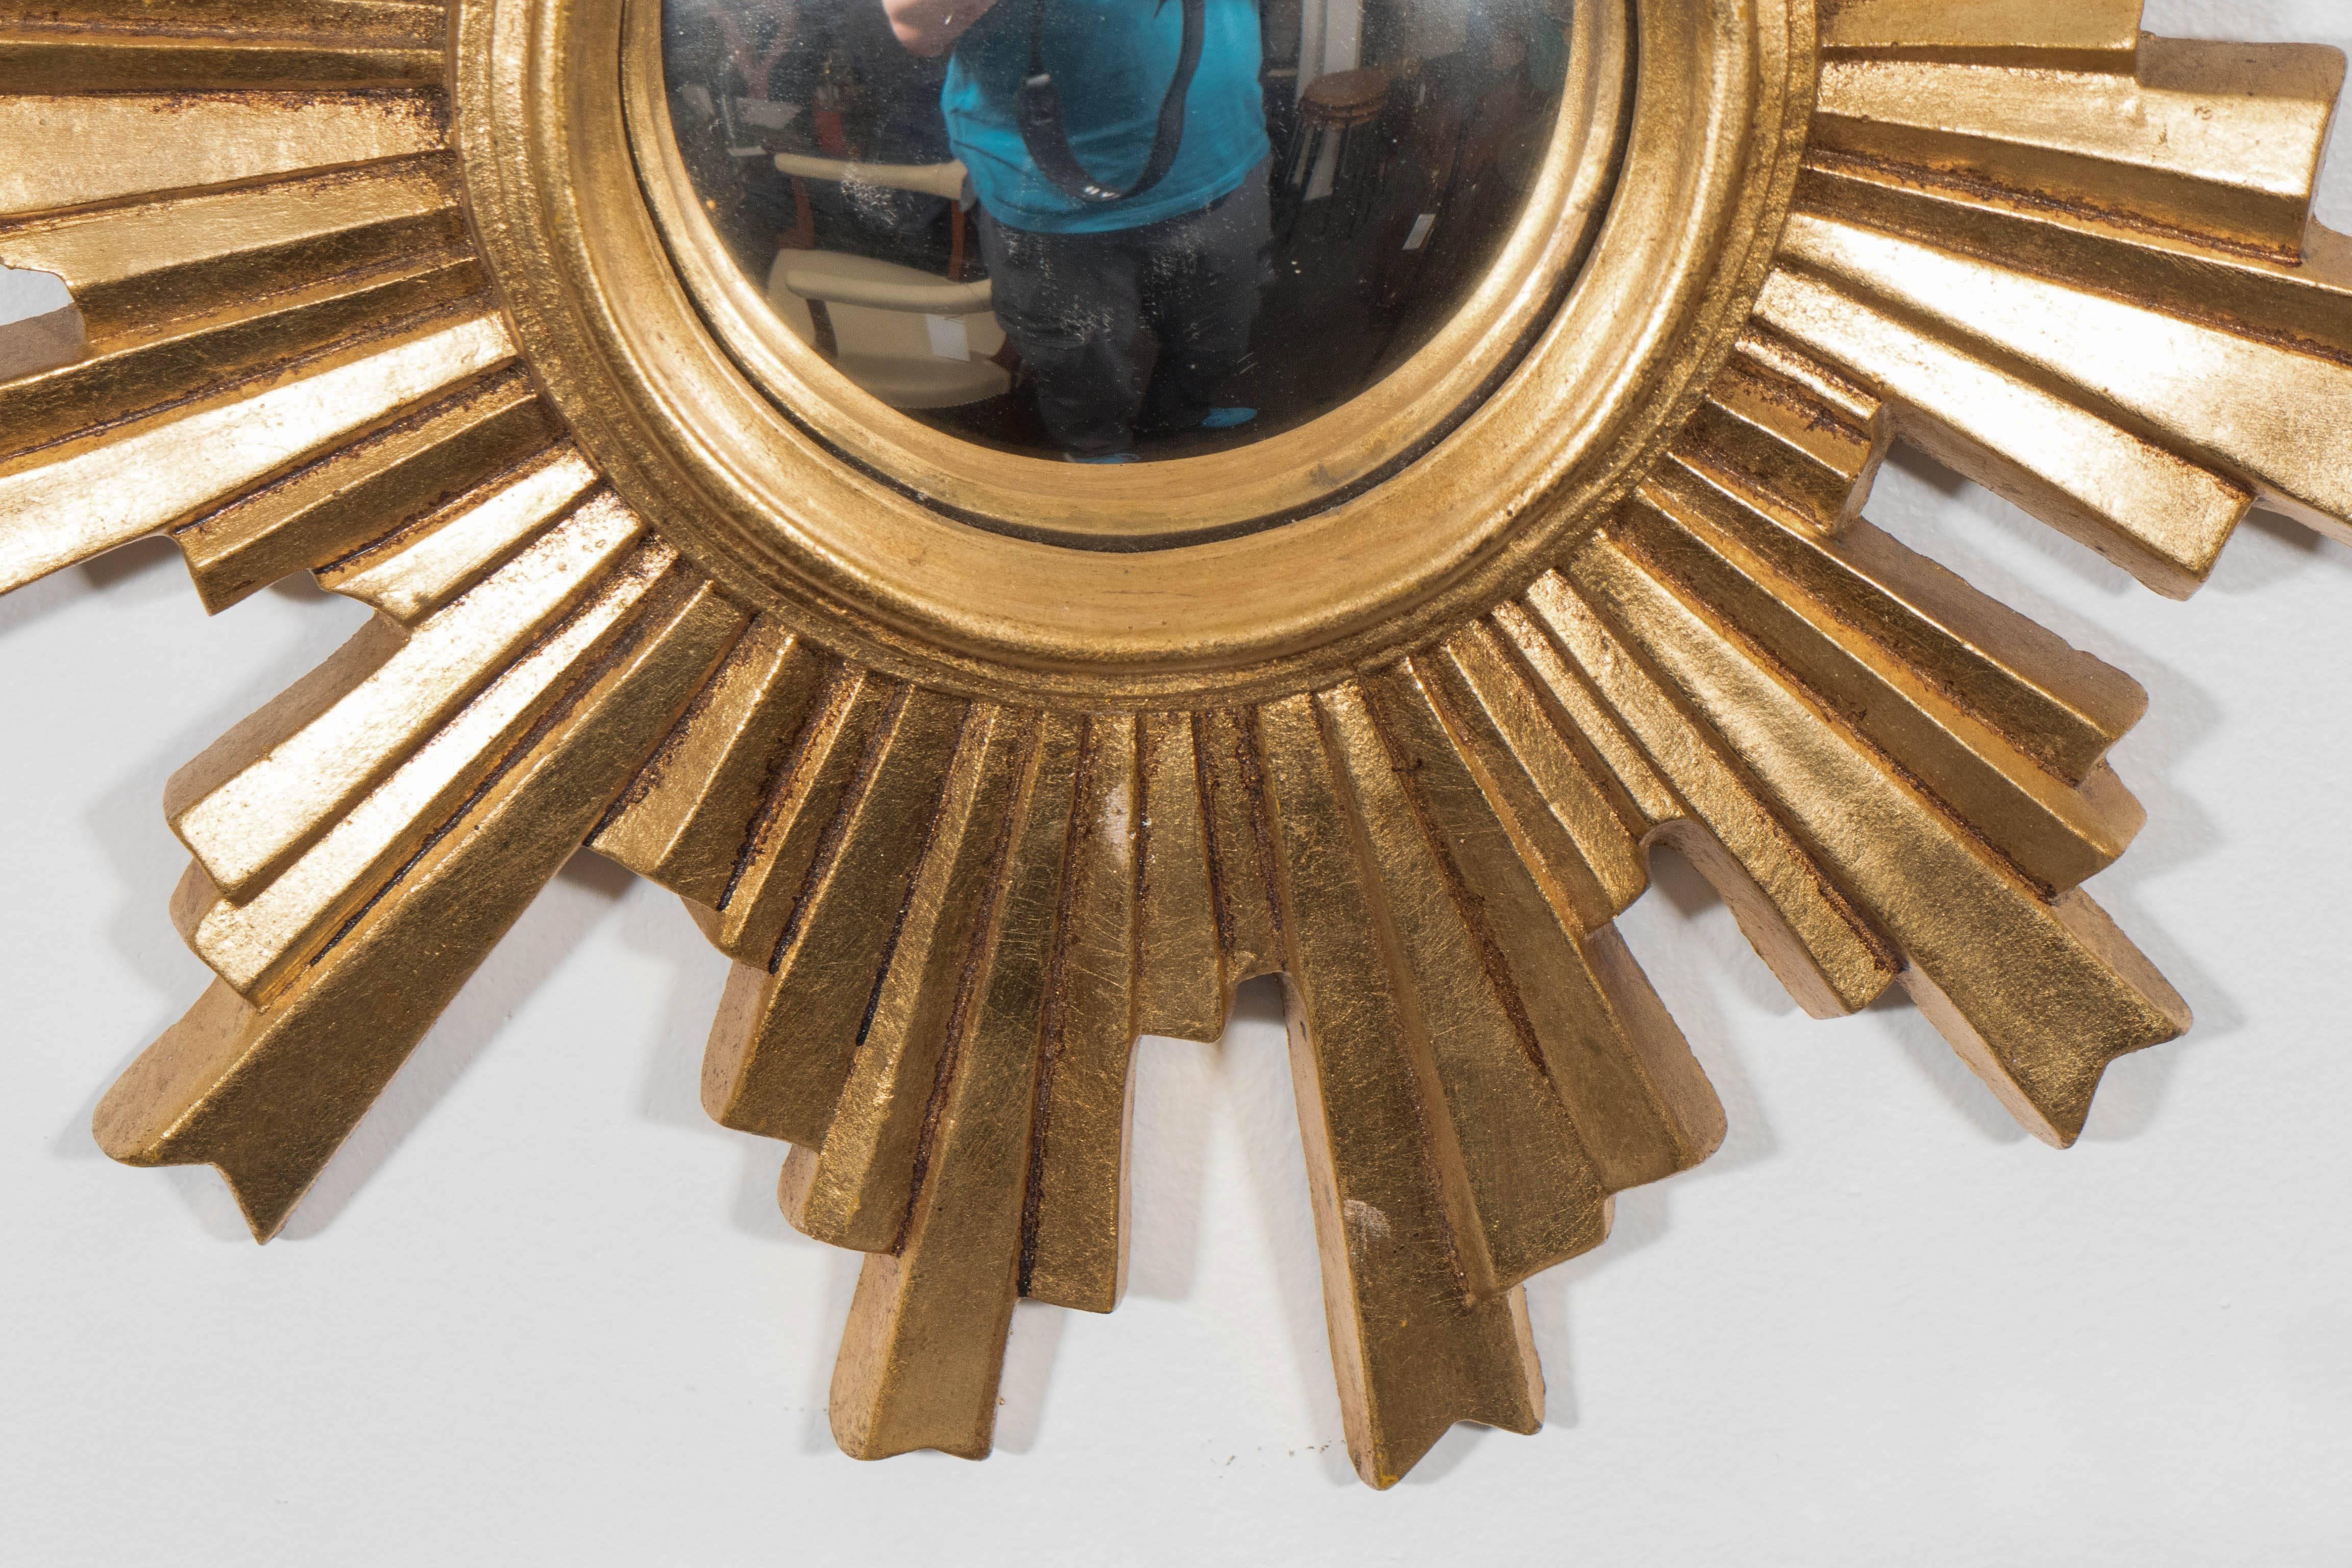 A vintage convex mirror, inset within a brilliantly gilded sunburst frame, produced in Germany, circa 1960s. Very good condition, with minimal wear to the gilt finish.